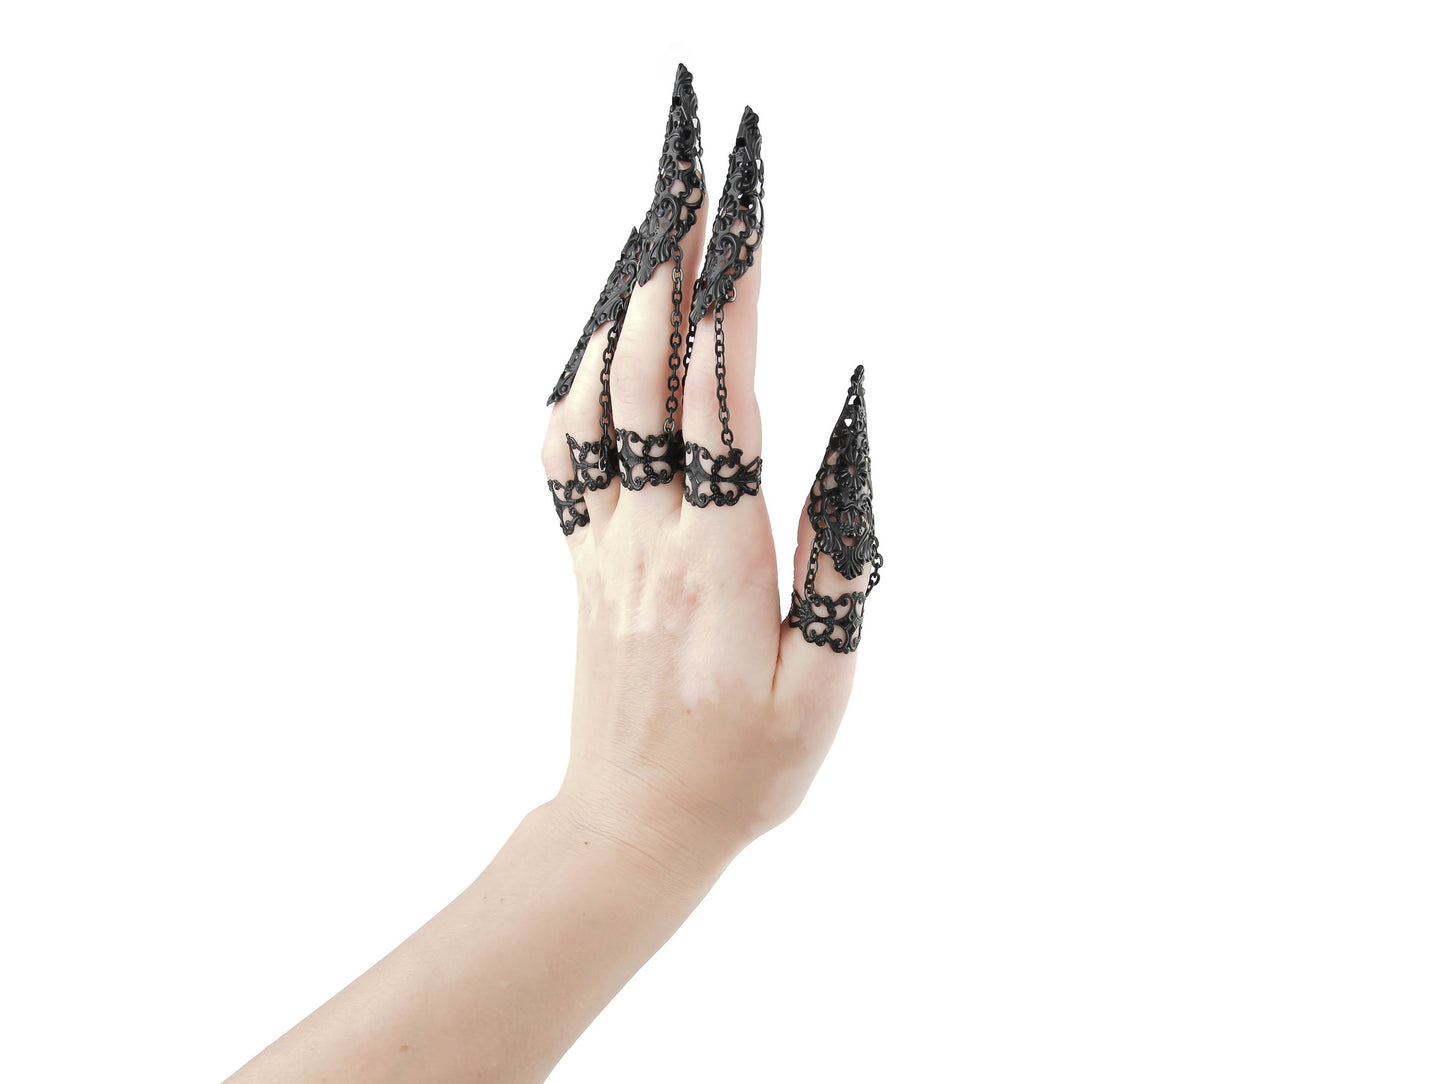 Embrace the edgy elegance of Myril Jewels with this bold, handcrafted full hand set of armored claw rings, designed for the dark-avantgarde enthusiast. These elaborate black claw rings reflect a Neo Gothic vibe, perfect for gothic-chic, Witchcore, and Whimsigoth styles, making them an audacious choice for Halloween, punk events, or as a distinctive addition to everyday wear.